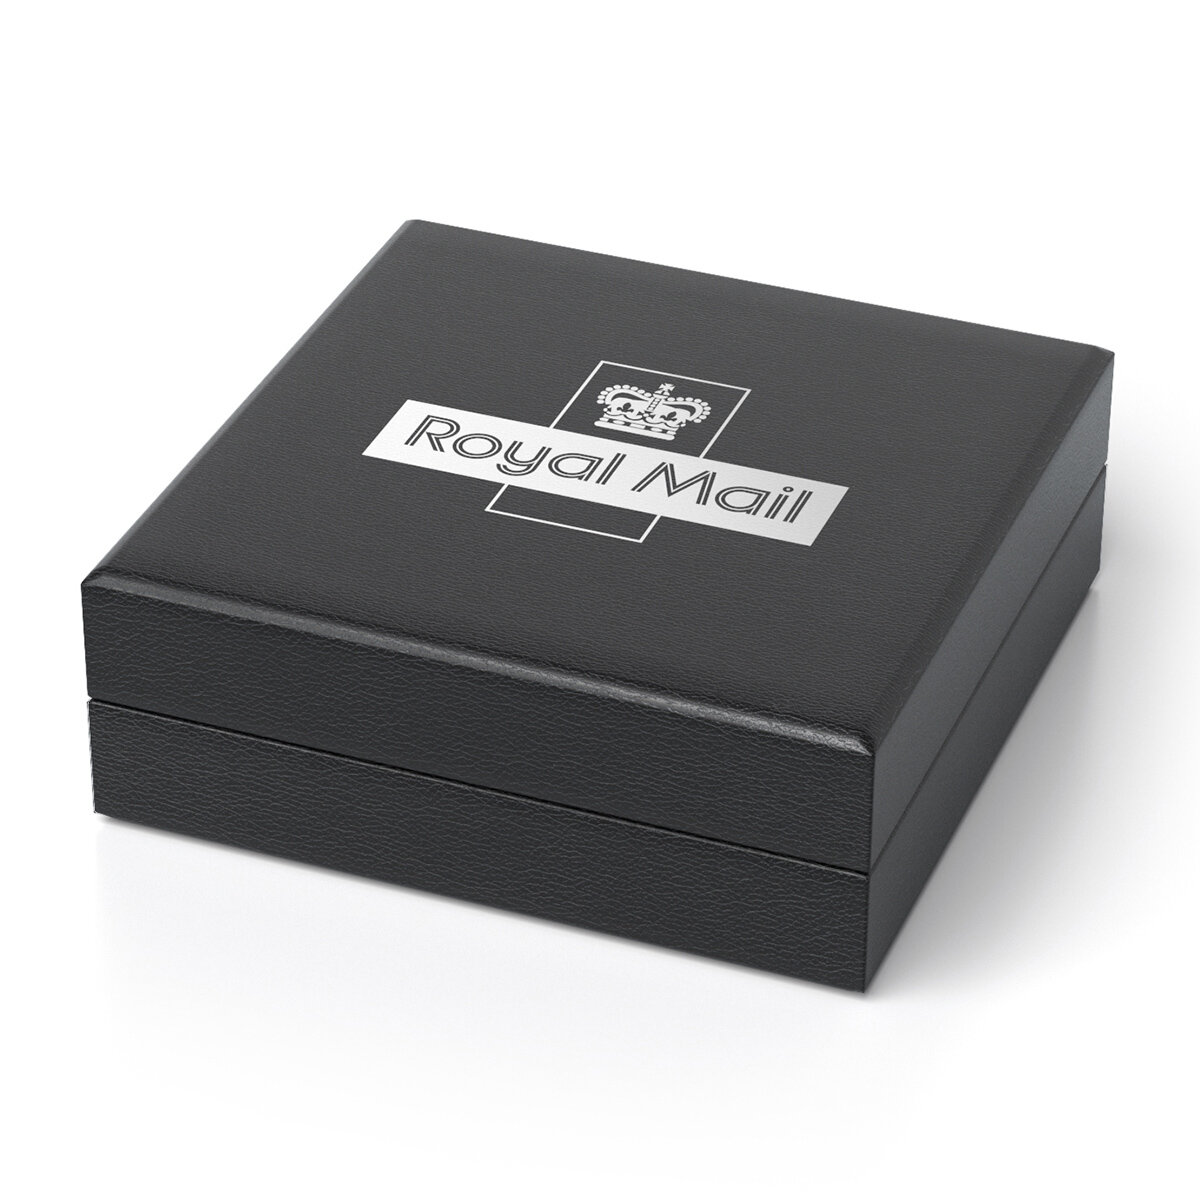 Buy The Rolling Stones Silver Stamp Ingot RS Box Image at Costco.co.uk